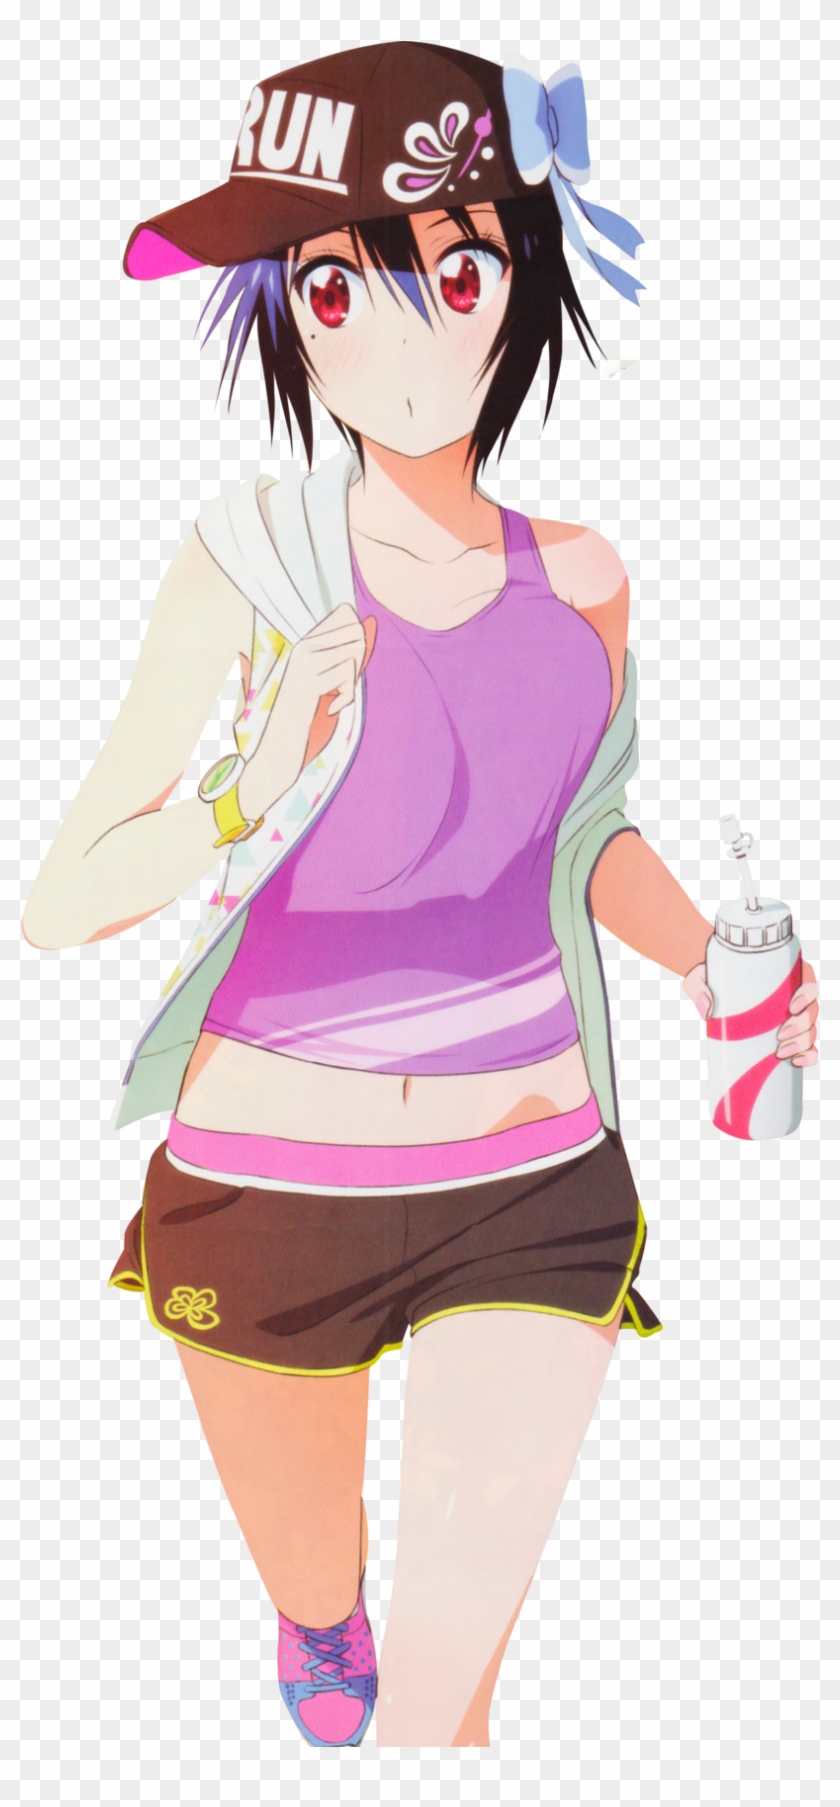 She Is Fit For This Bracket - Anime Girl Running Clothes Clipart